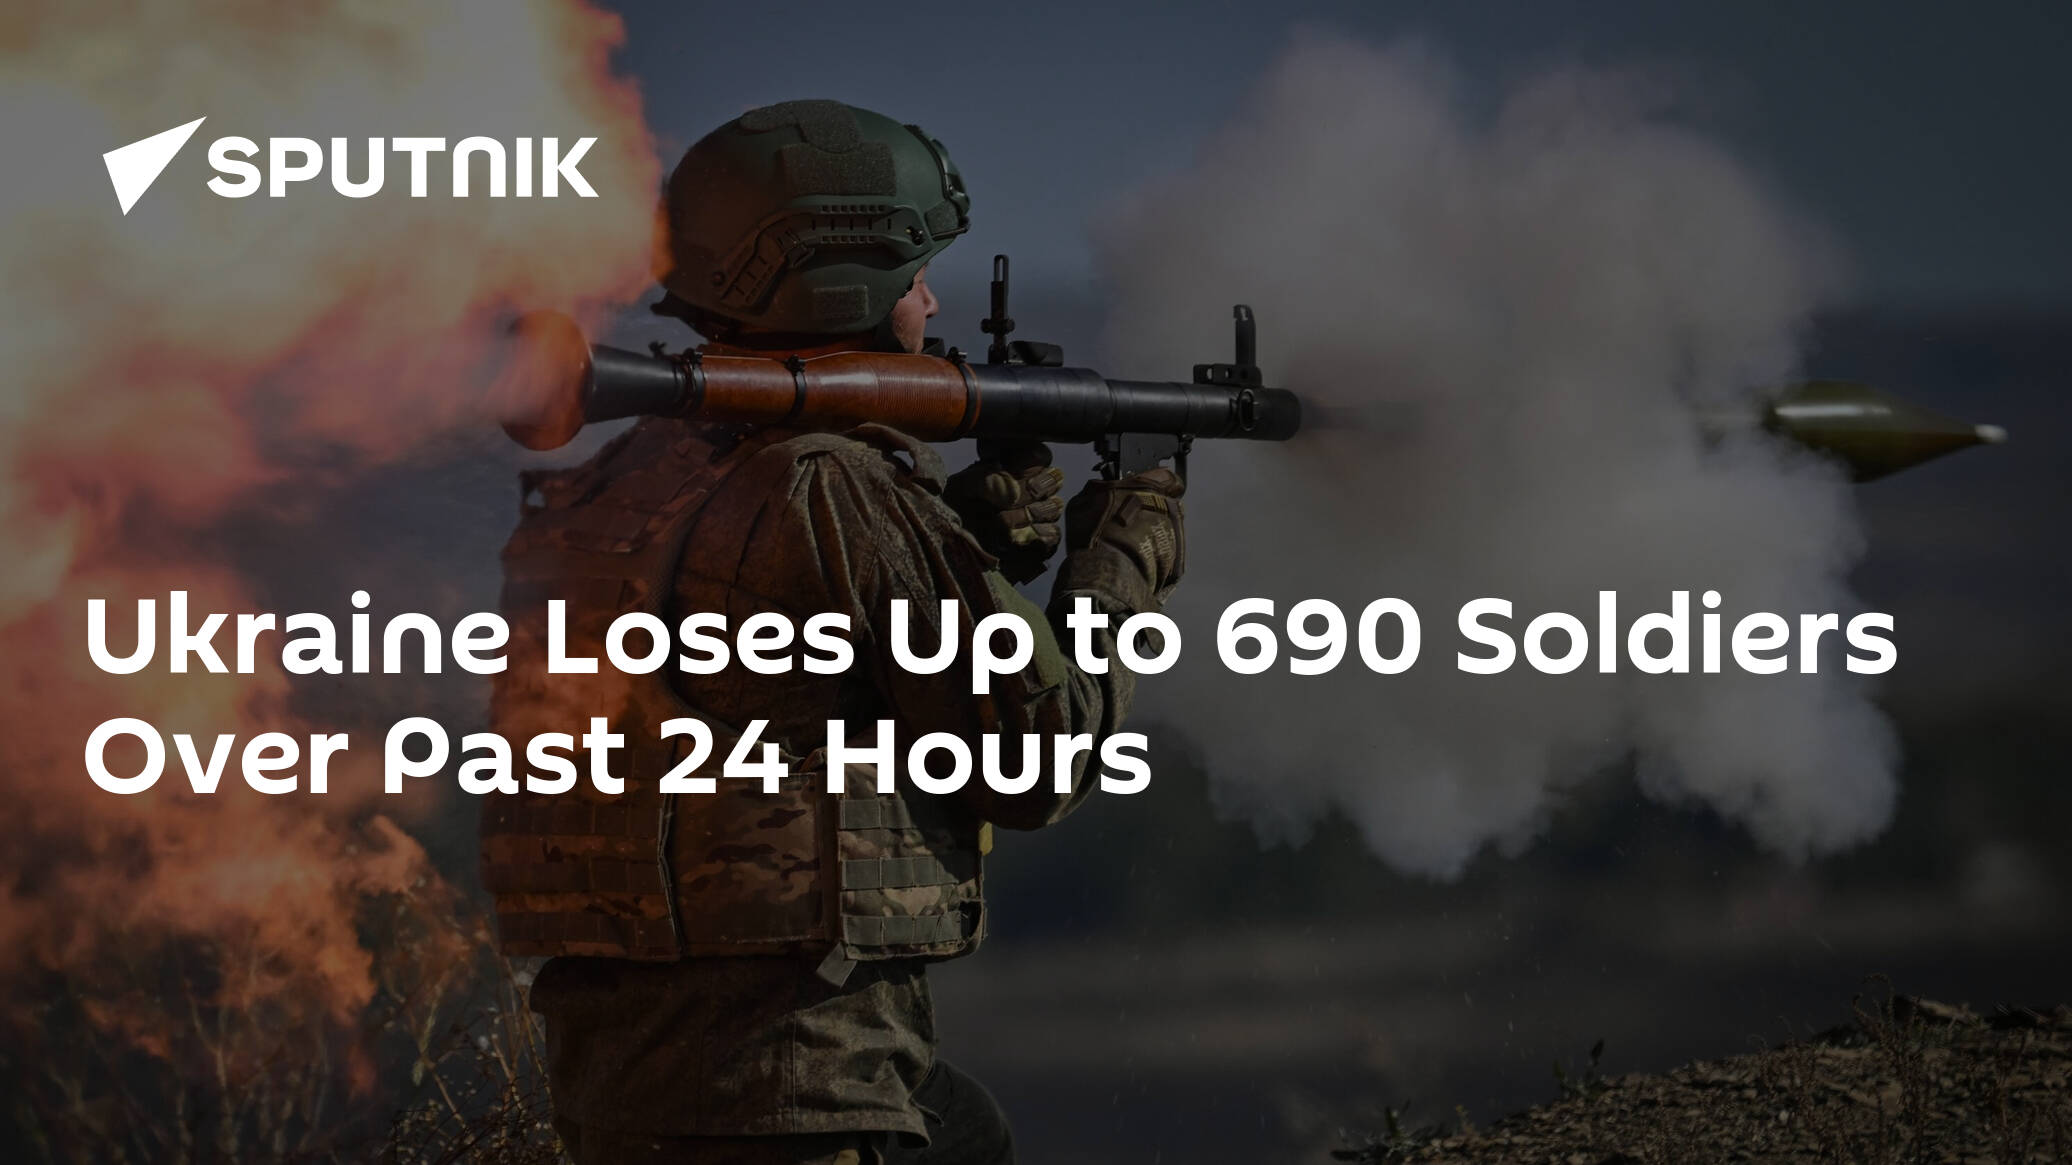 Ukraine Loses Up to 690 Soldiers Over Past 24 Hours